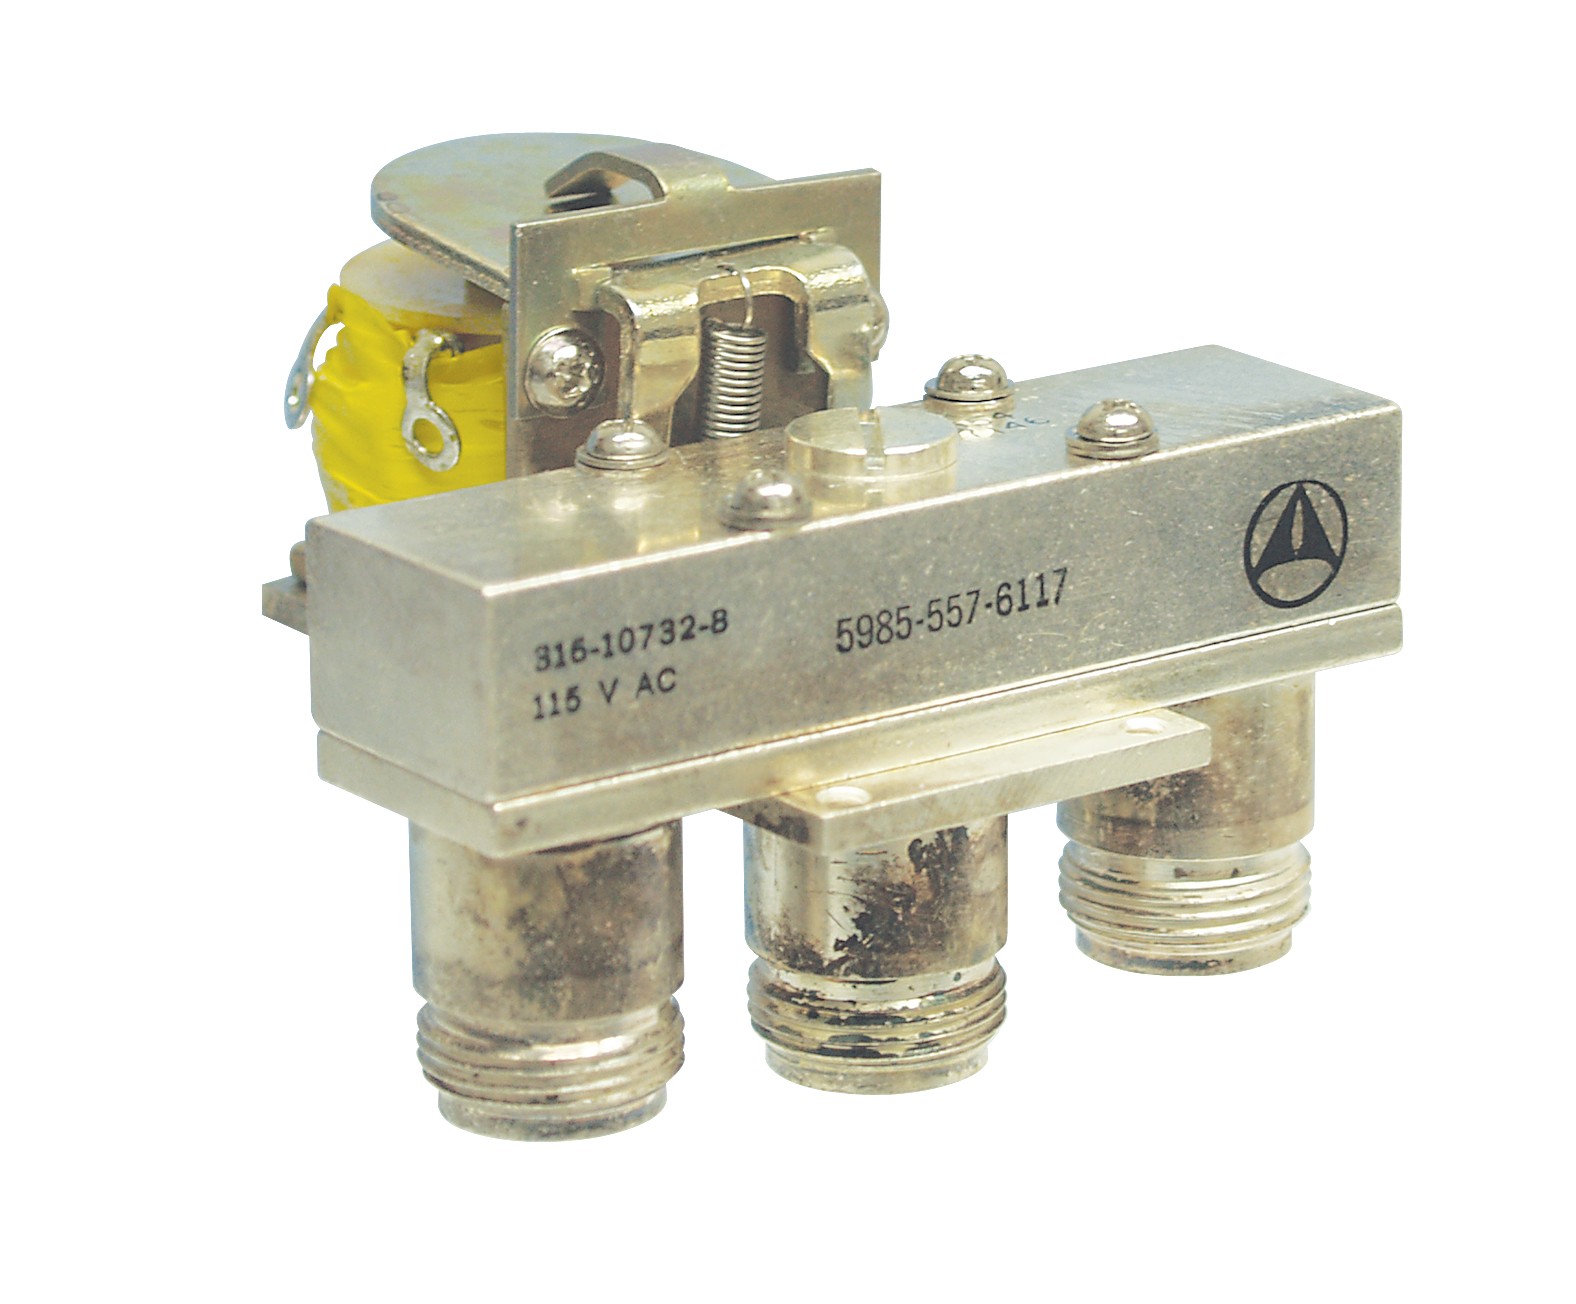 Amphenol Spdt Manual Rf Coaxial Switch